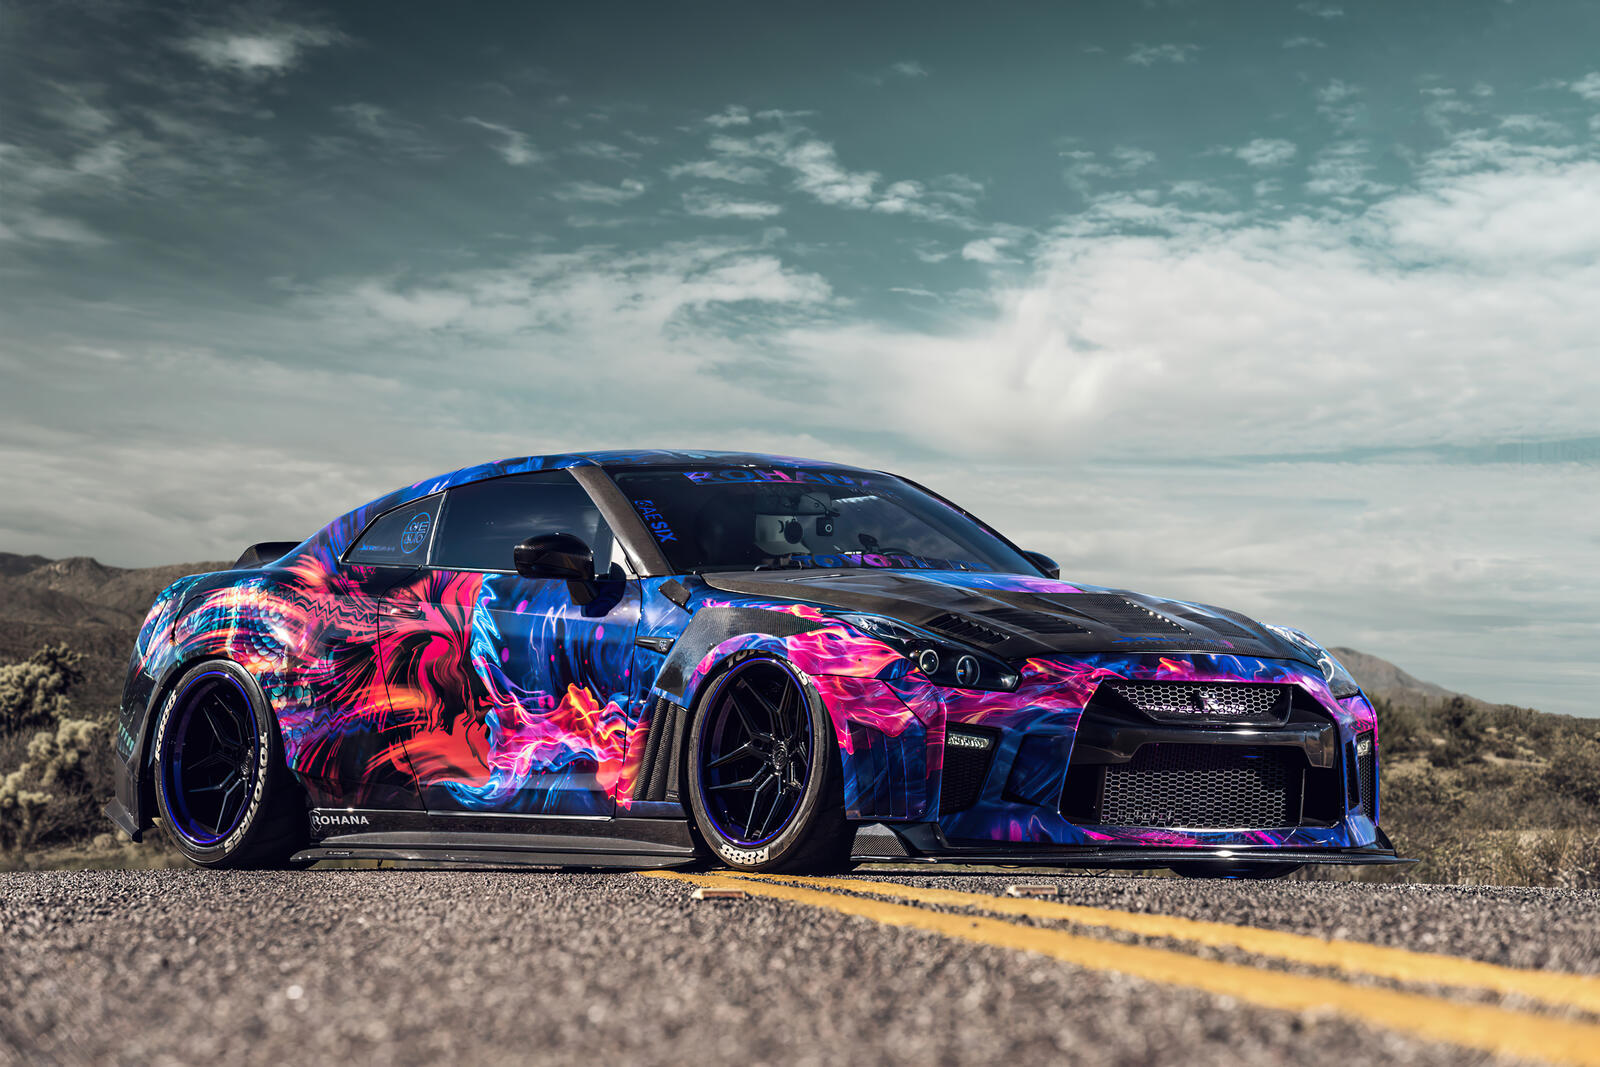 Free photo Wallpaper with Nissan GTR in cool coloring on the desktop